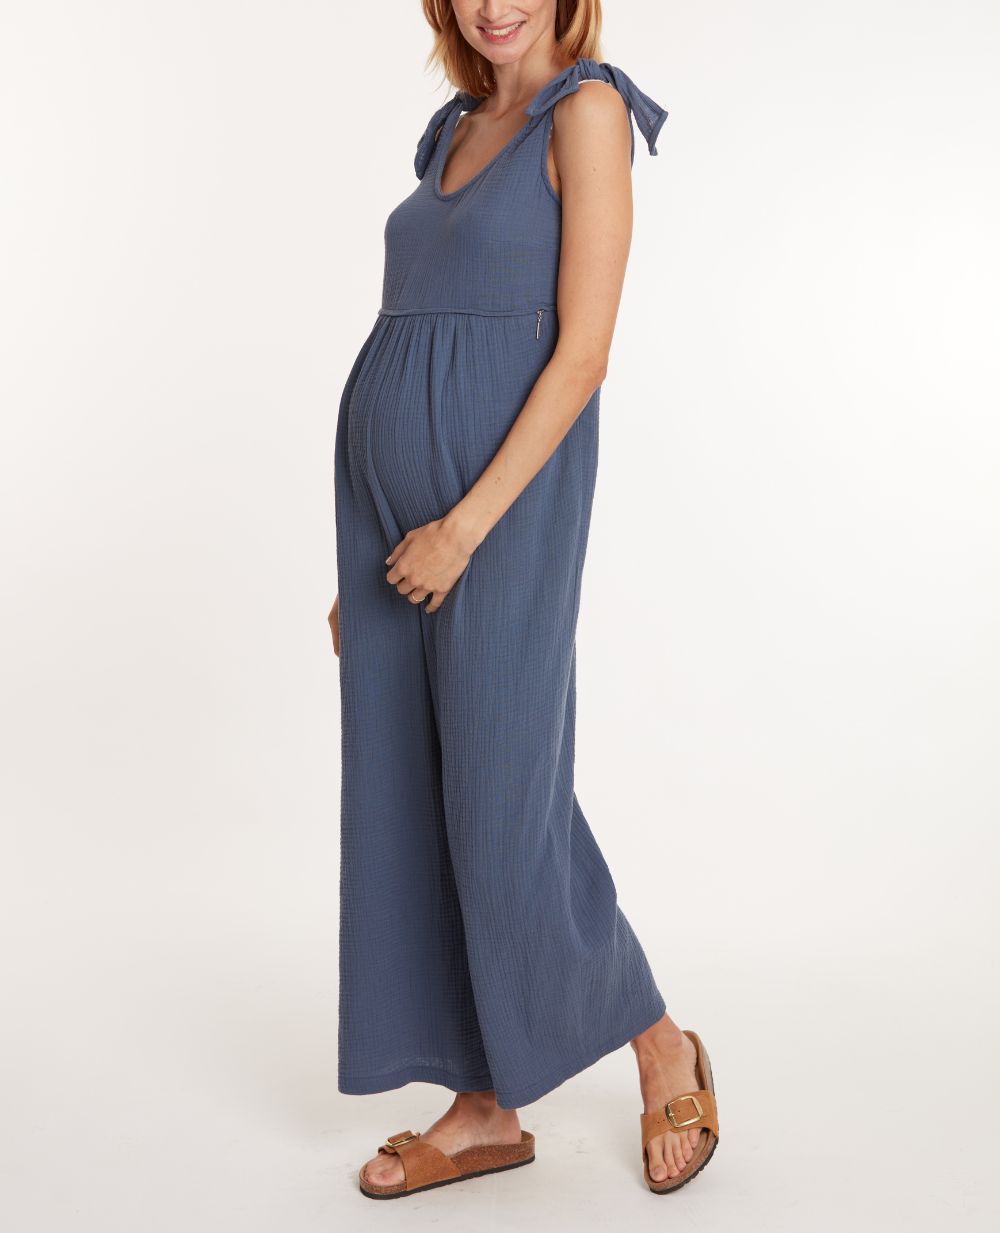 Pregnancy and nursing suit Canyon midnight blue